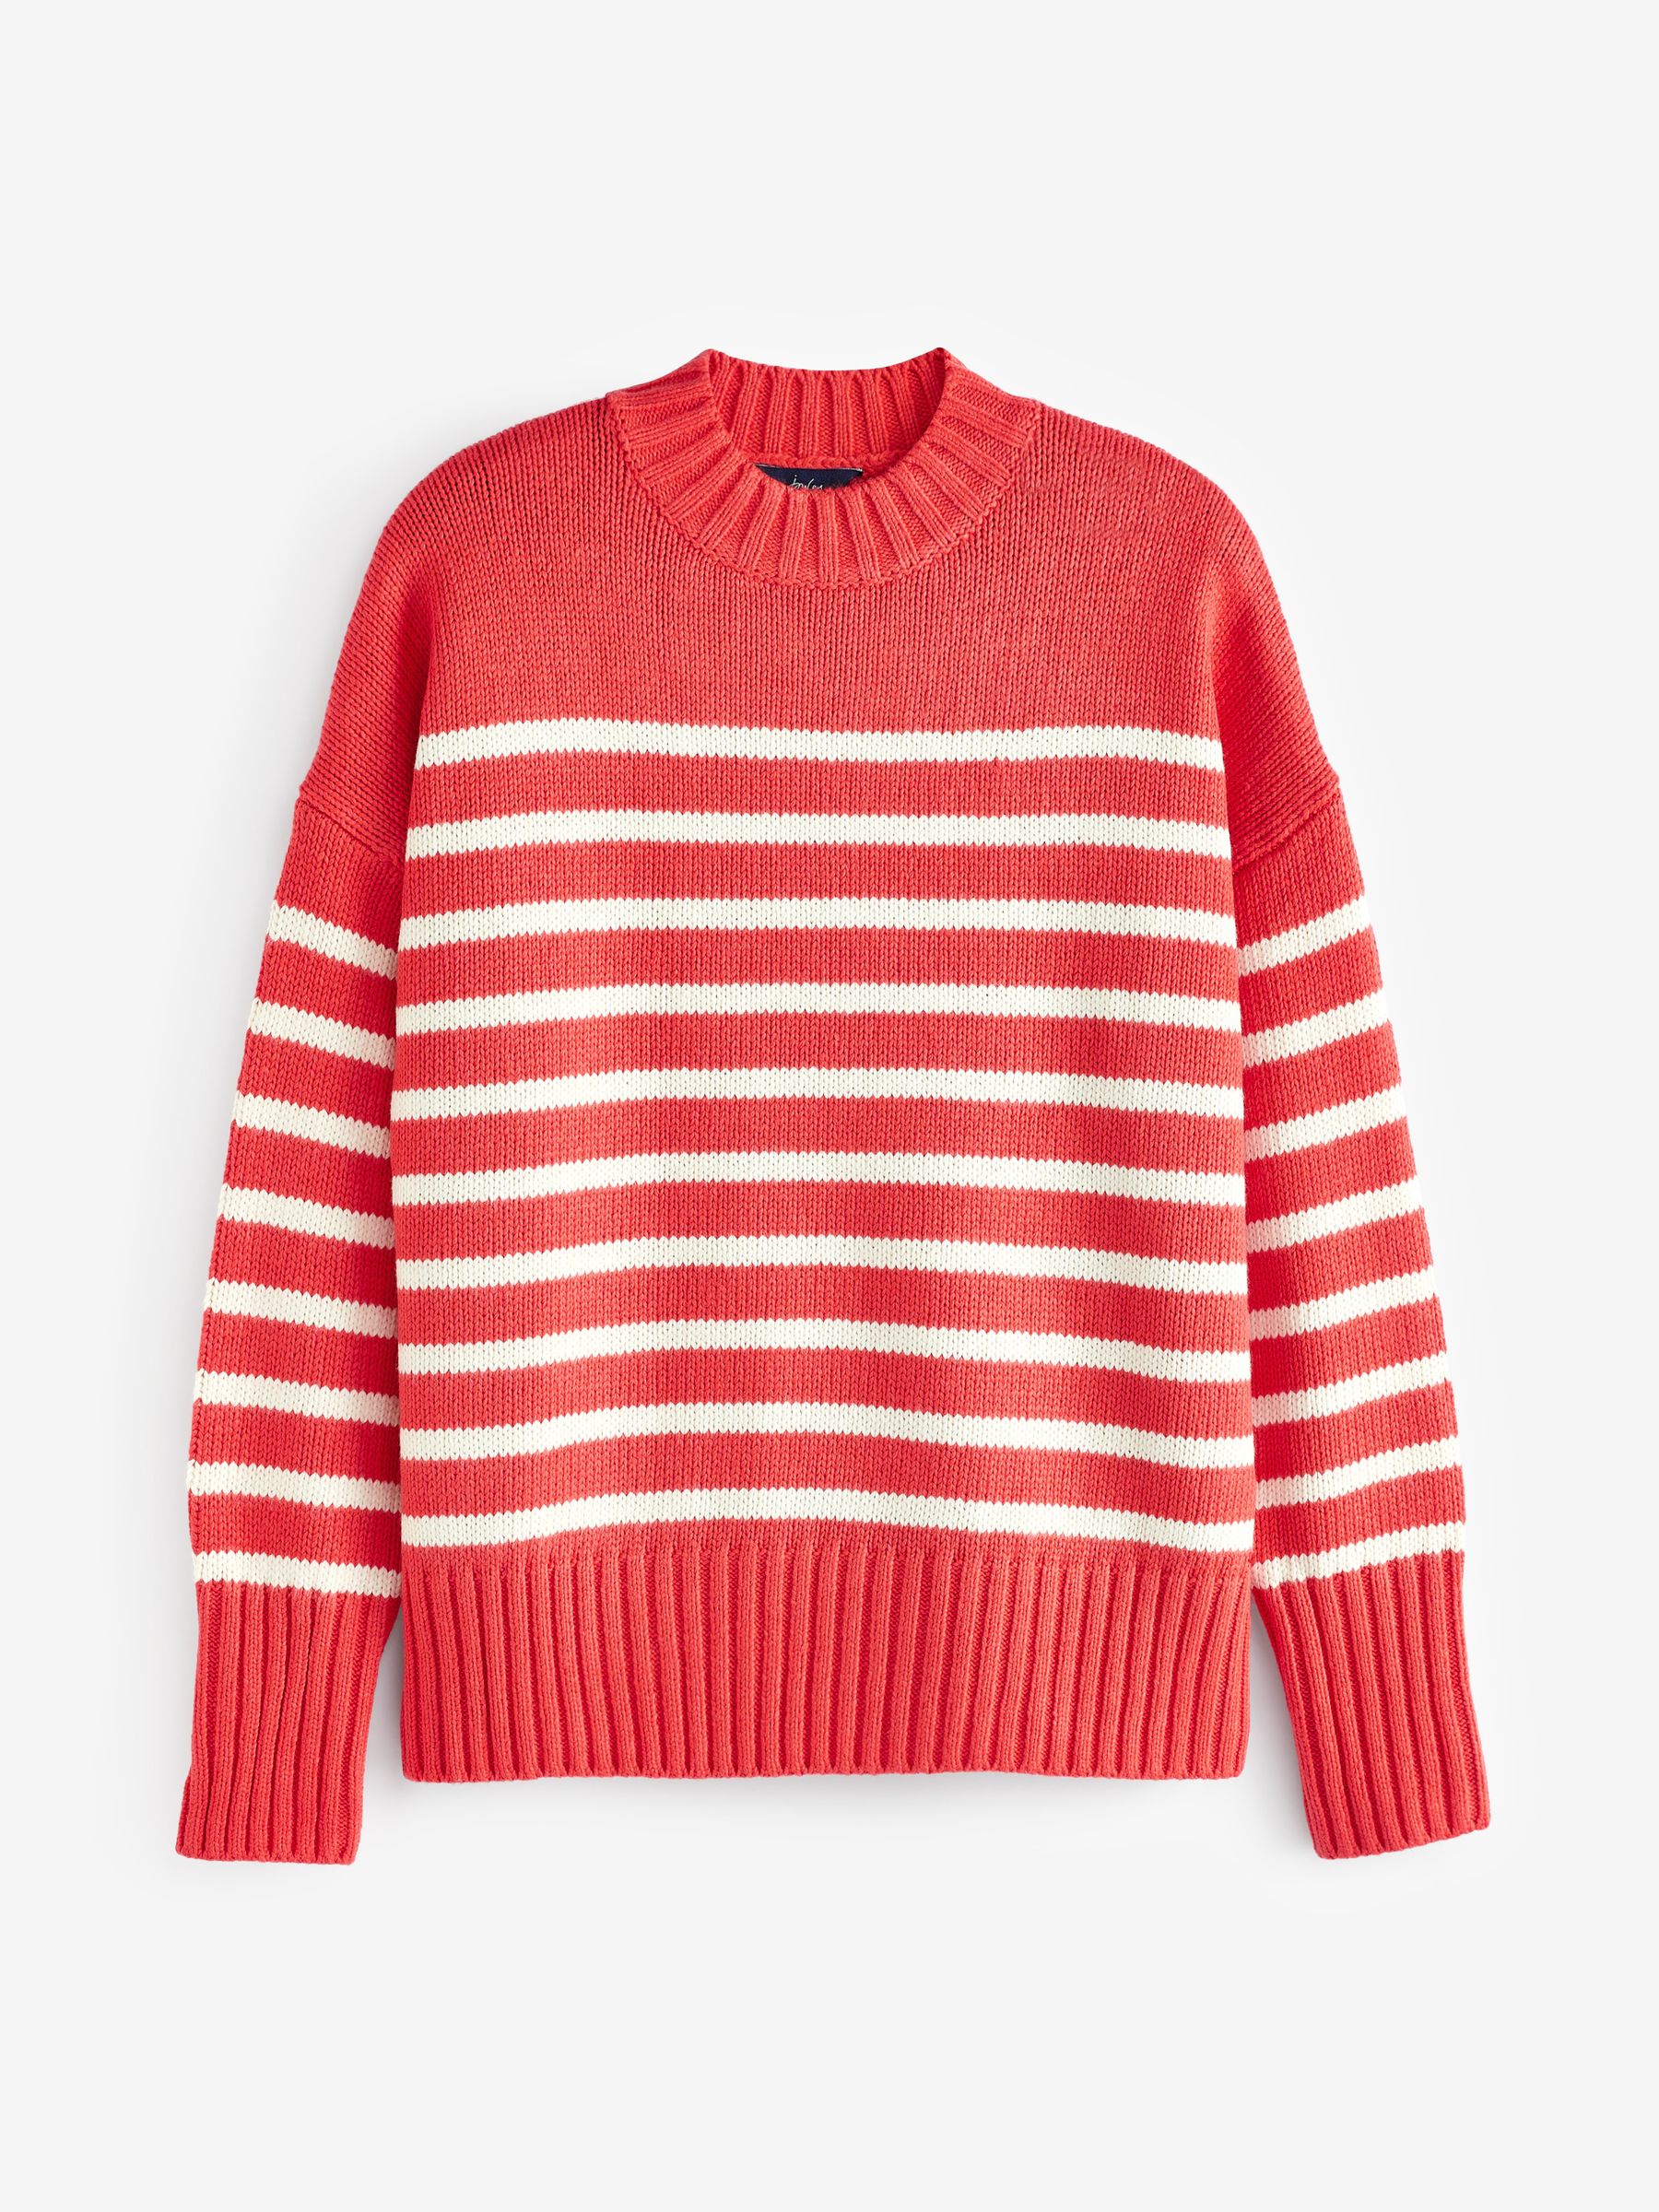 Buy Joules Bay Strap Jumper from the Joules online shop